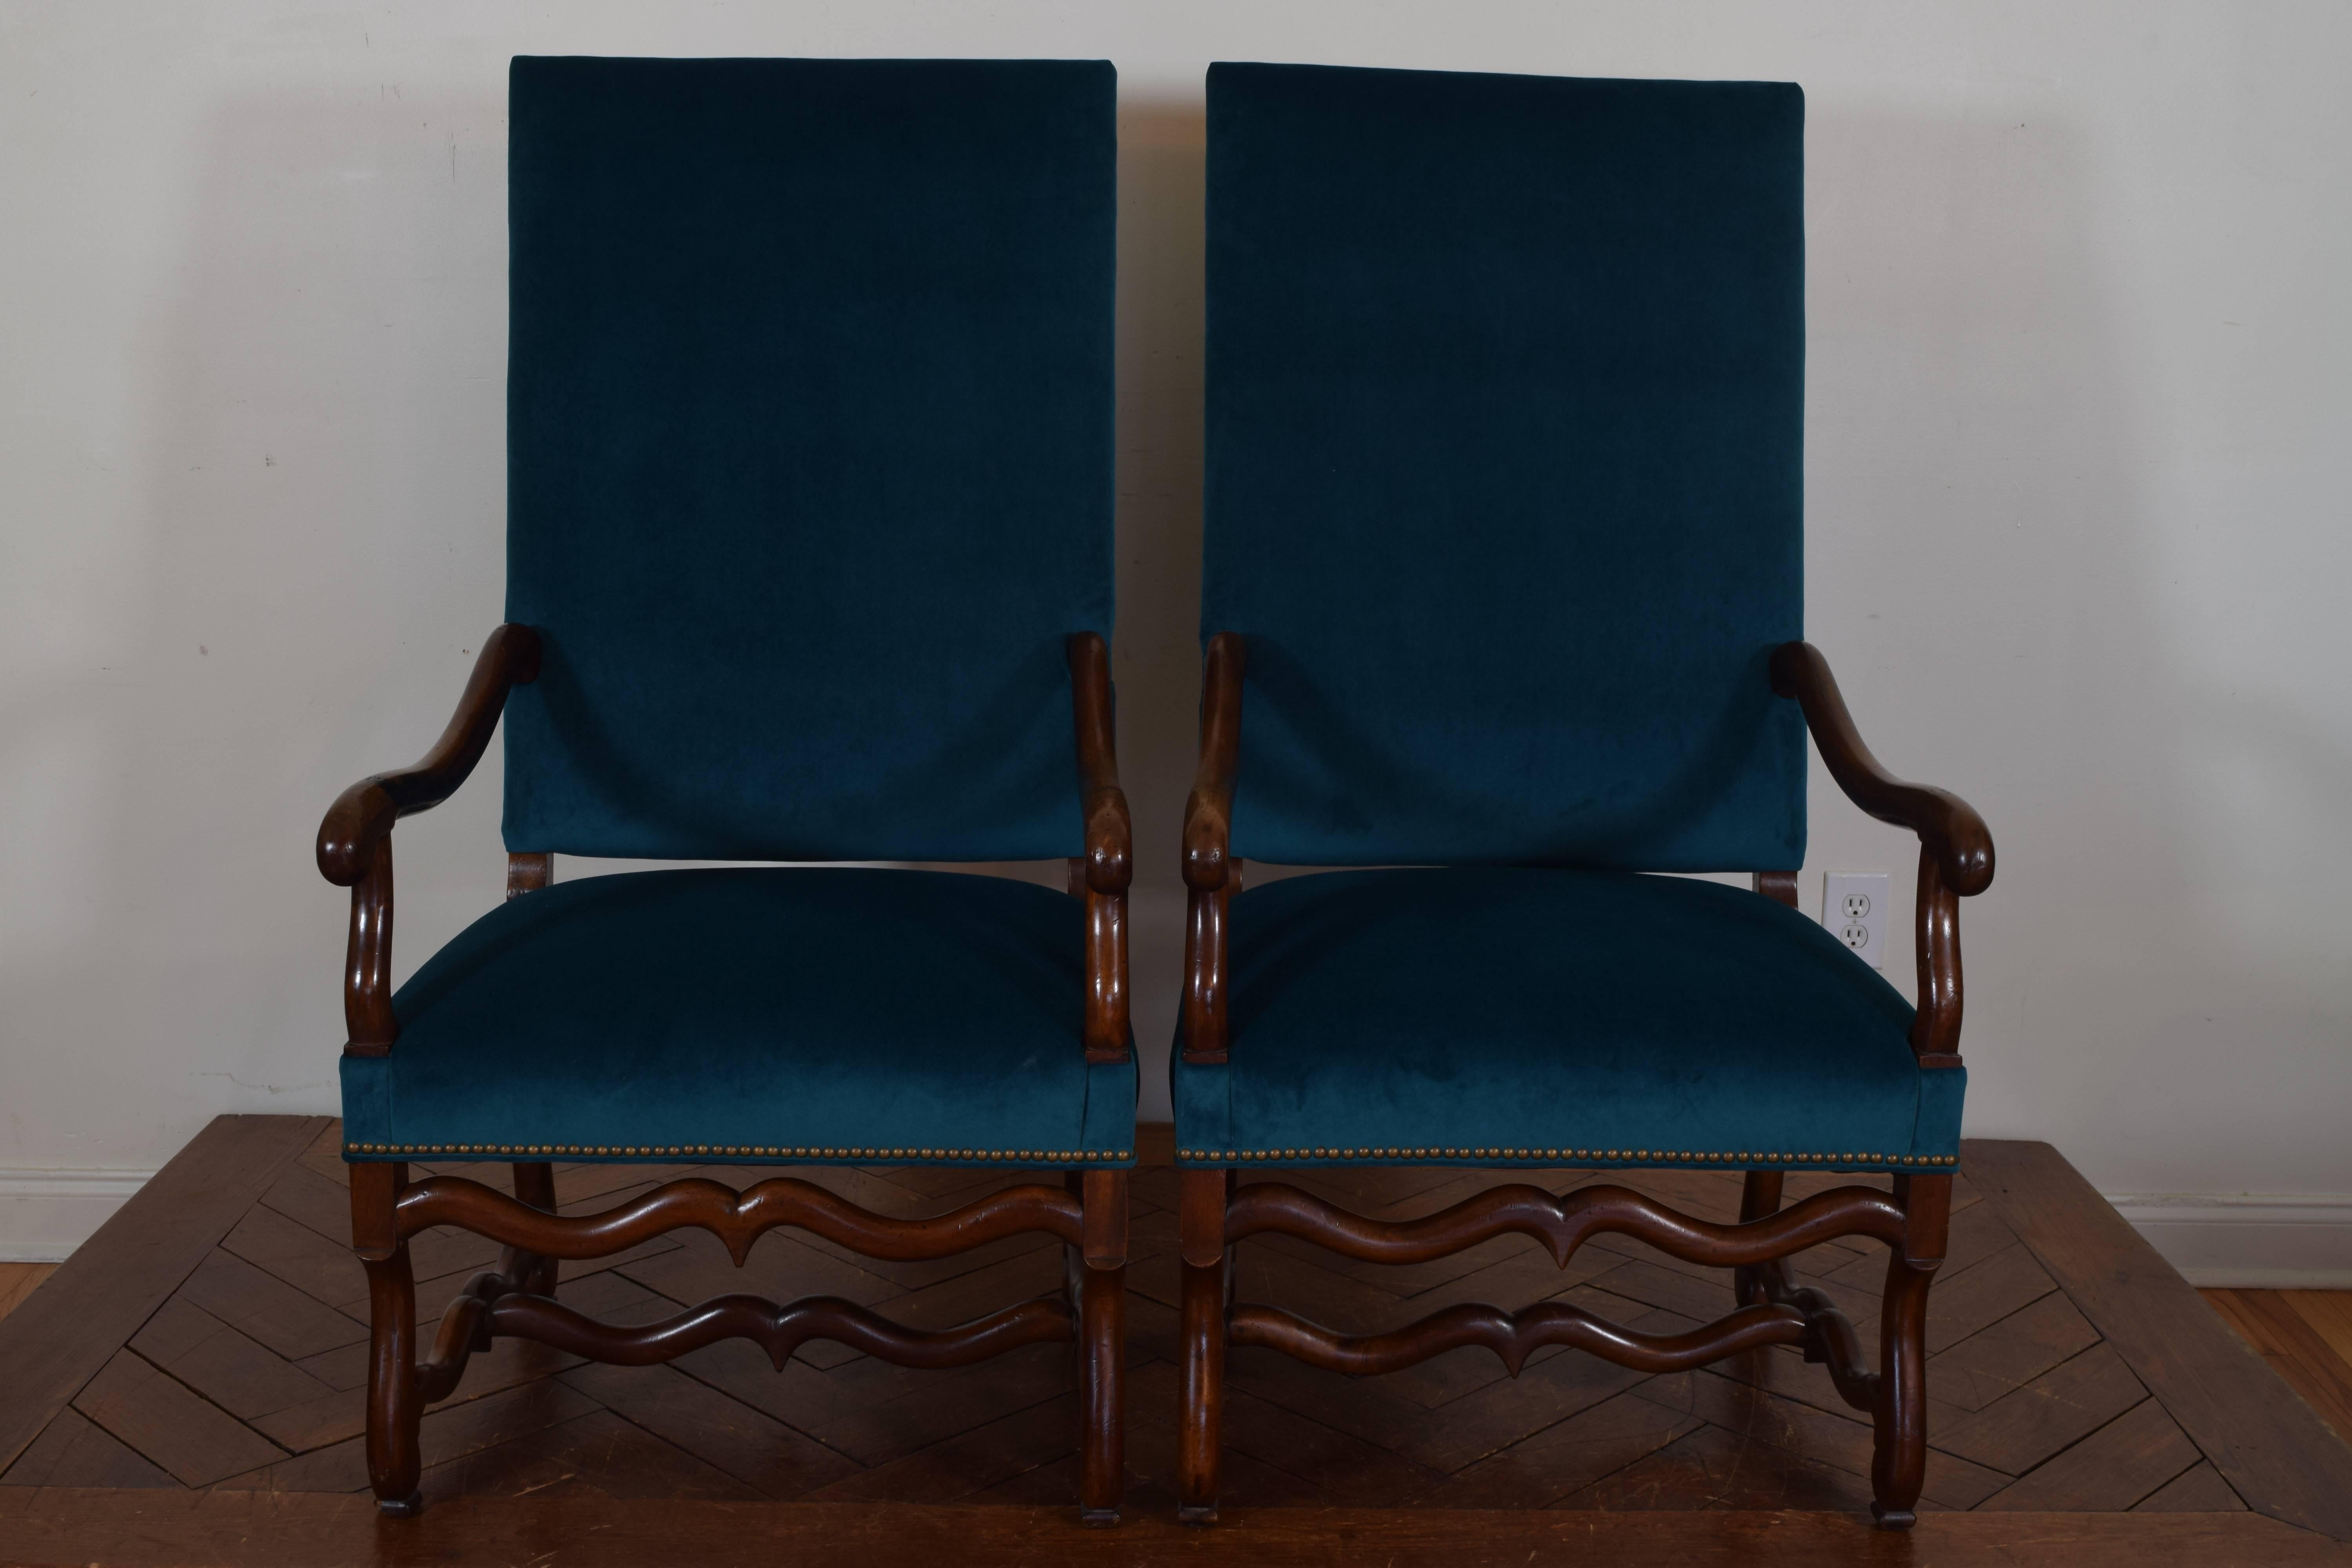 Having upholstered seats and backs with curved arms, stretchers and legs in the Os de Mouton style of the early 18th century, these armchairs from the mid-19th century, upholstered in velvet trimmed in patinated brass nailheads.